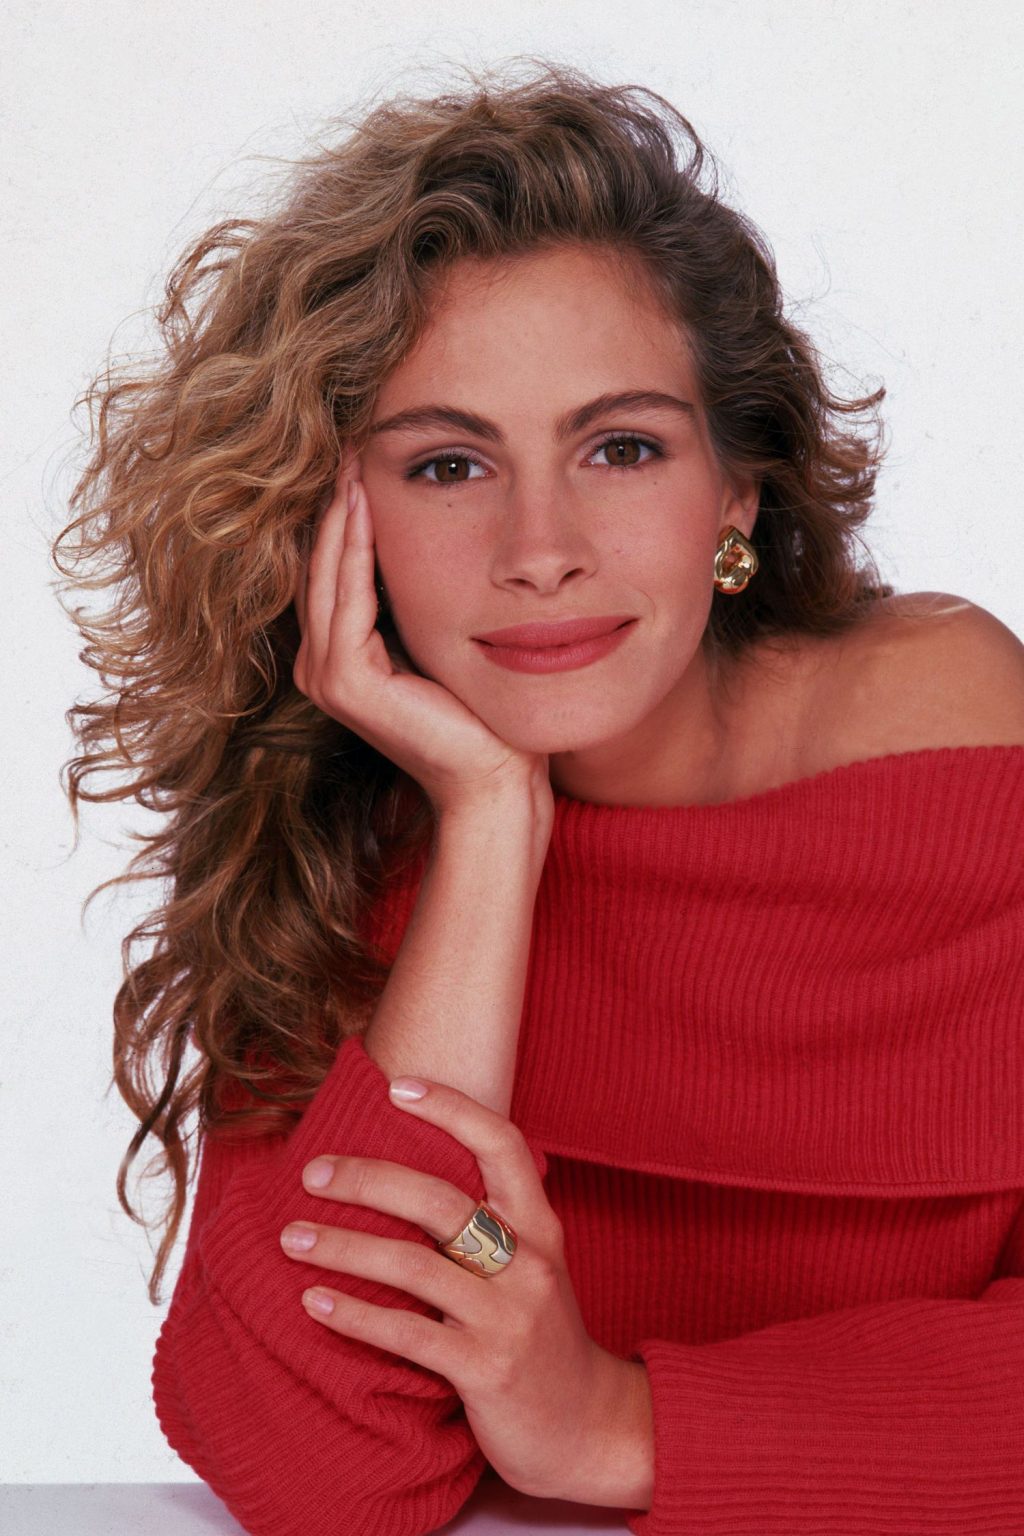 20 Sexy Photos Of Julia Roberts That Will Melt Your Heart - The Old Man